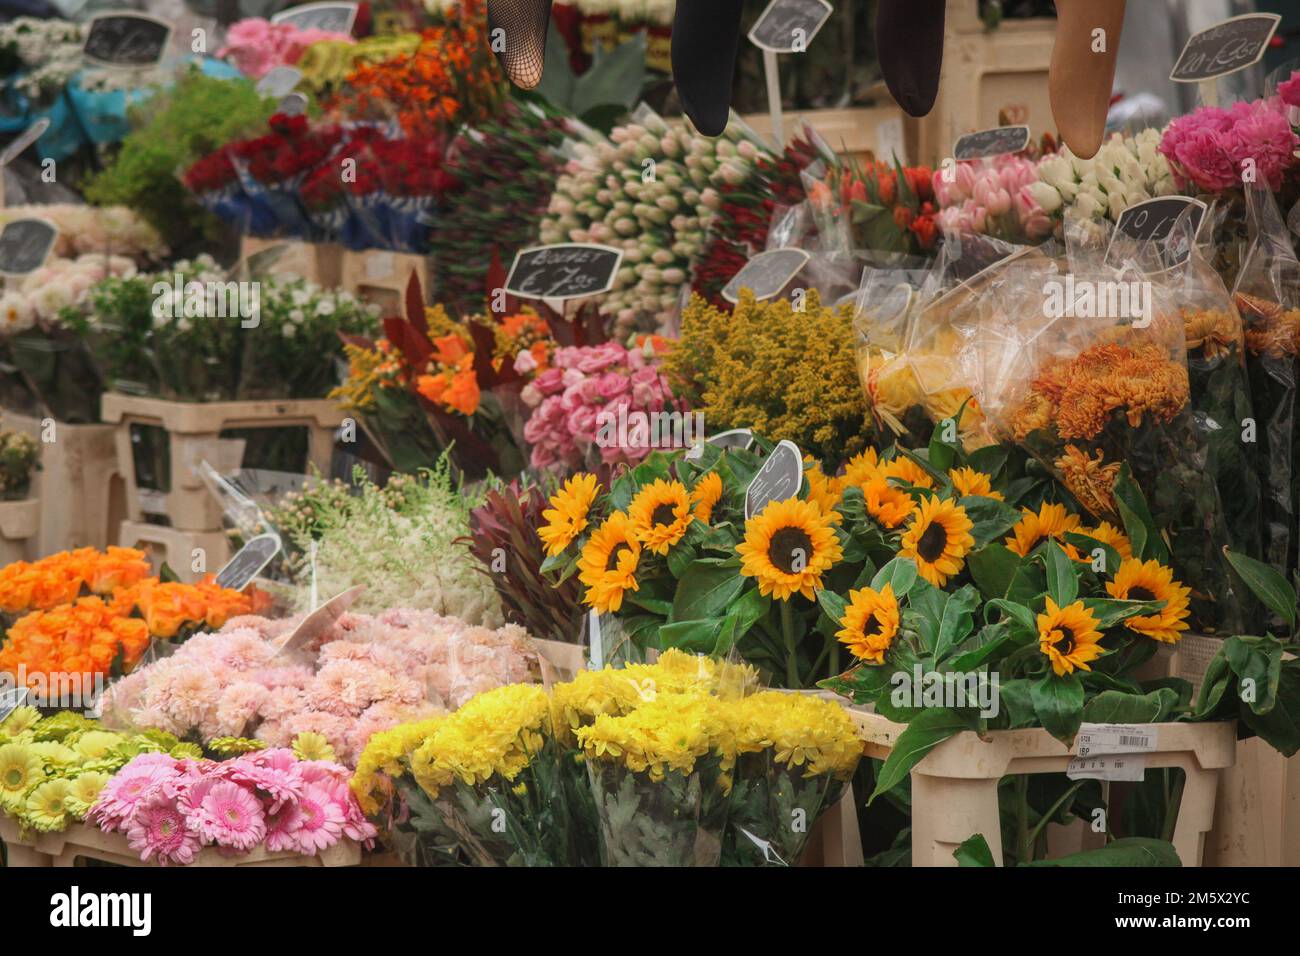 A big collection of flowers on a flower market in amsterdam. multitude of bouquettes and petals. Stock Photo